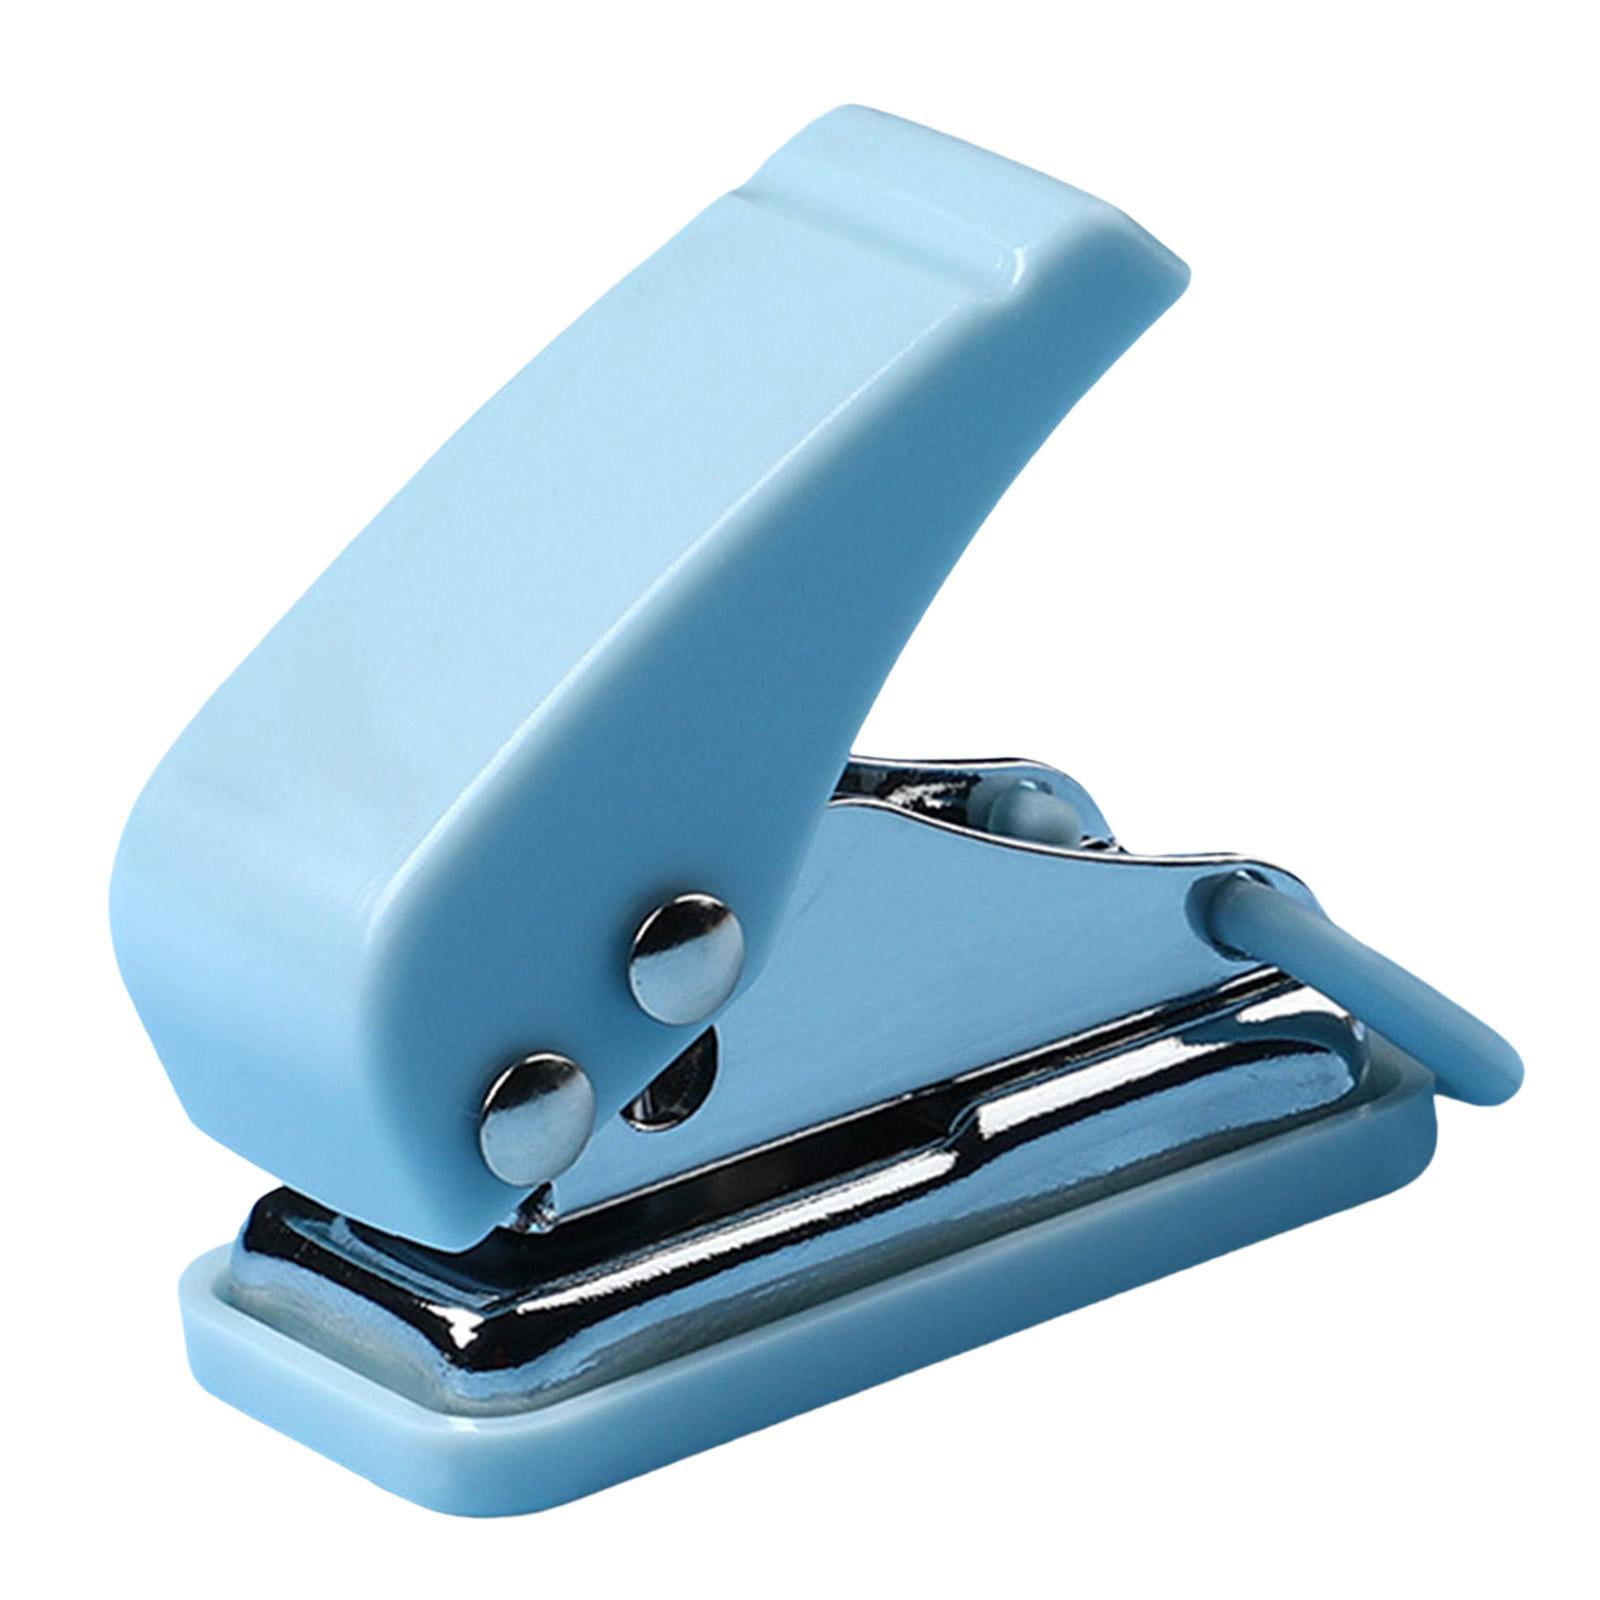  Single Hole Punch 1/4” Hole Puncher for Crafts, One Hole Paper  Punch with Blue Soft Grip Handle, Small Hole Punch for Kids and Adults :  Arts, Crafts & Sewing